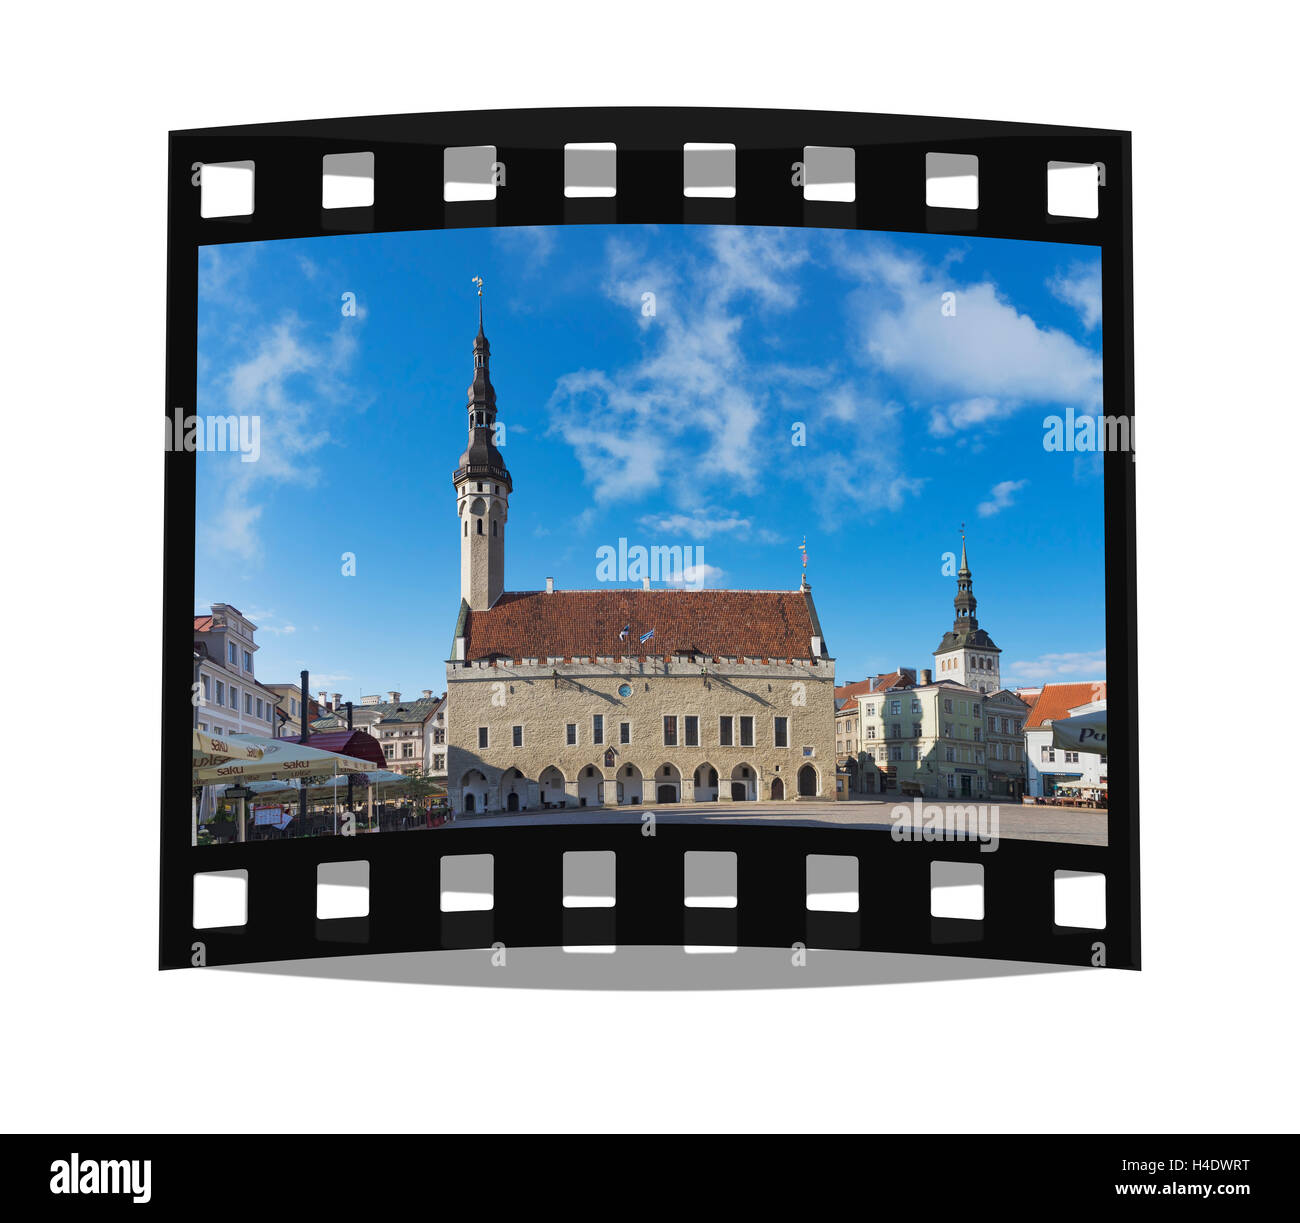 The Tallinn town hall is located in the old town of Tallinn, Estonia, Baltic States, Europe Stock Photo